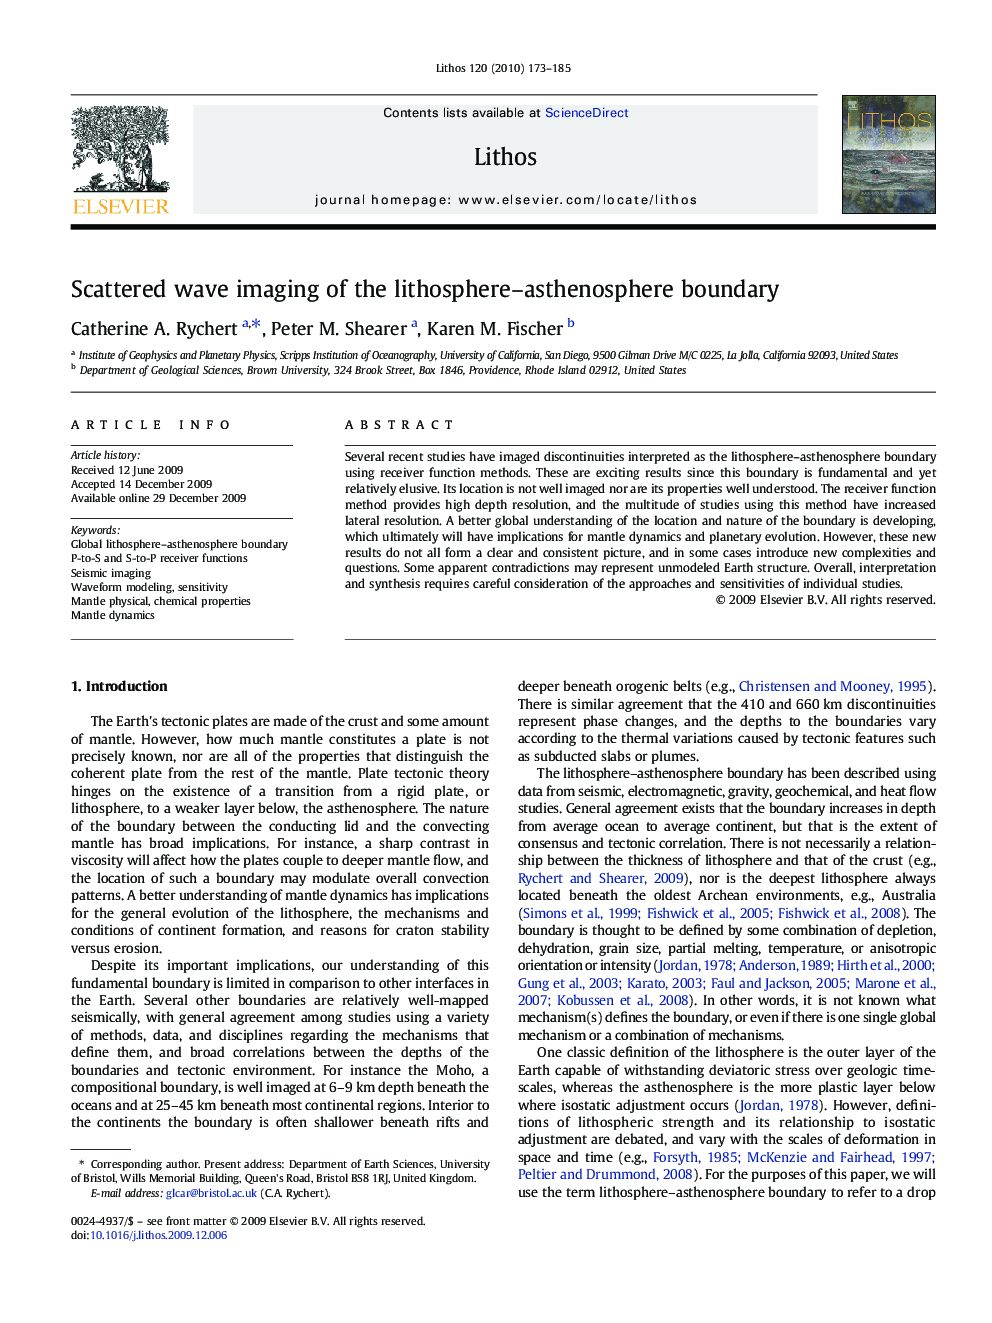 Scattered wave imaging of the lithosphere–asthenosphere boundary